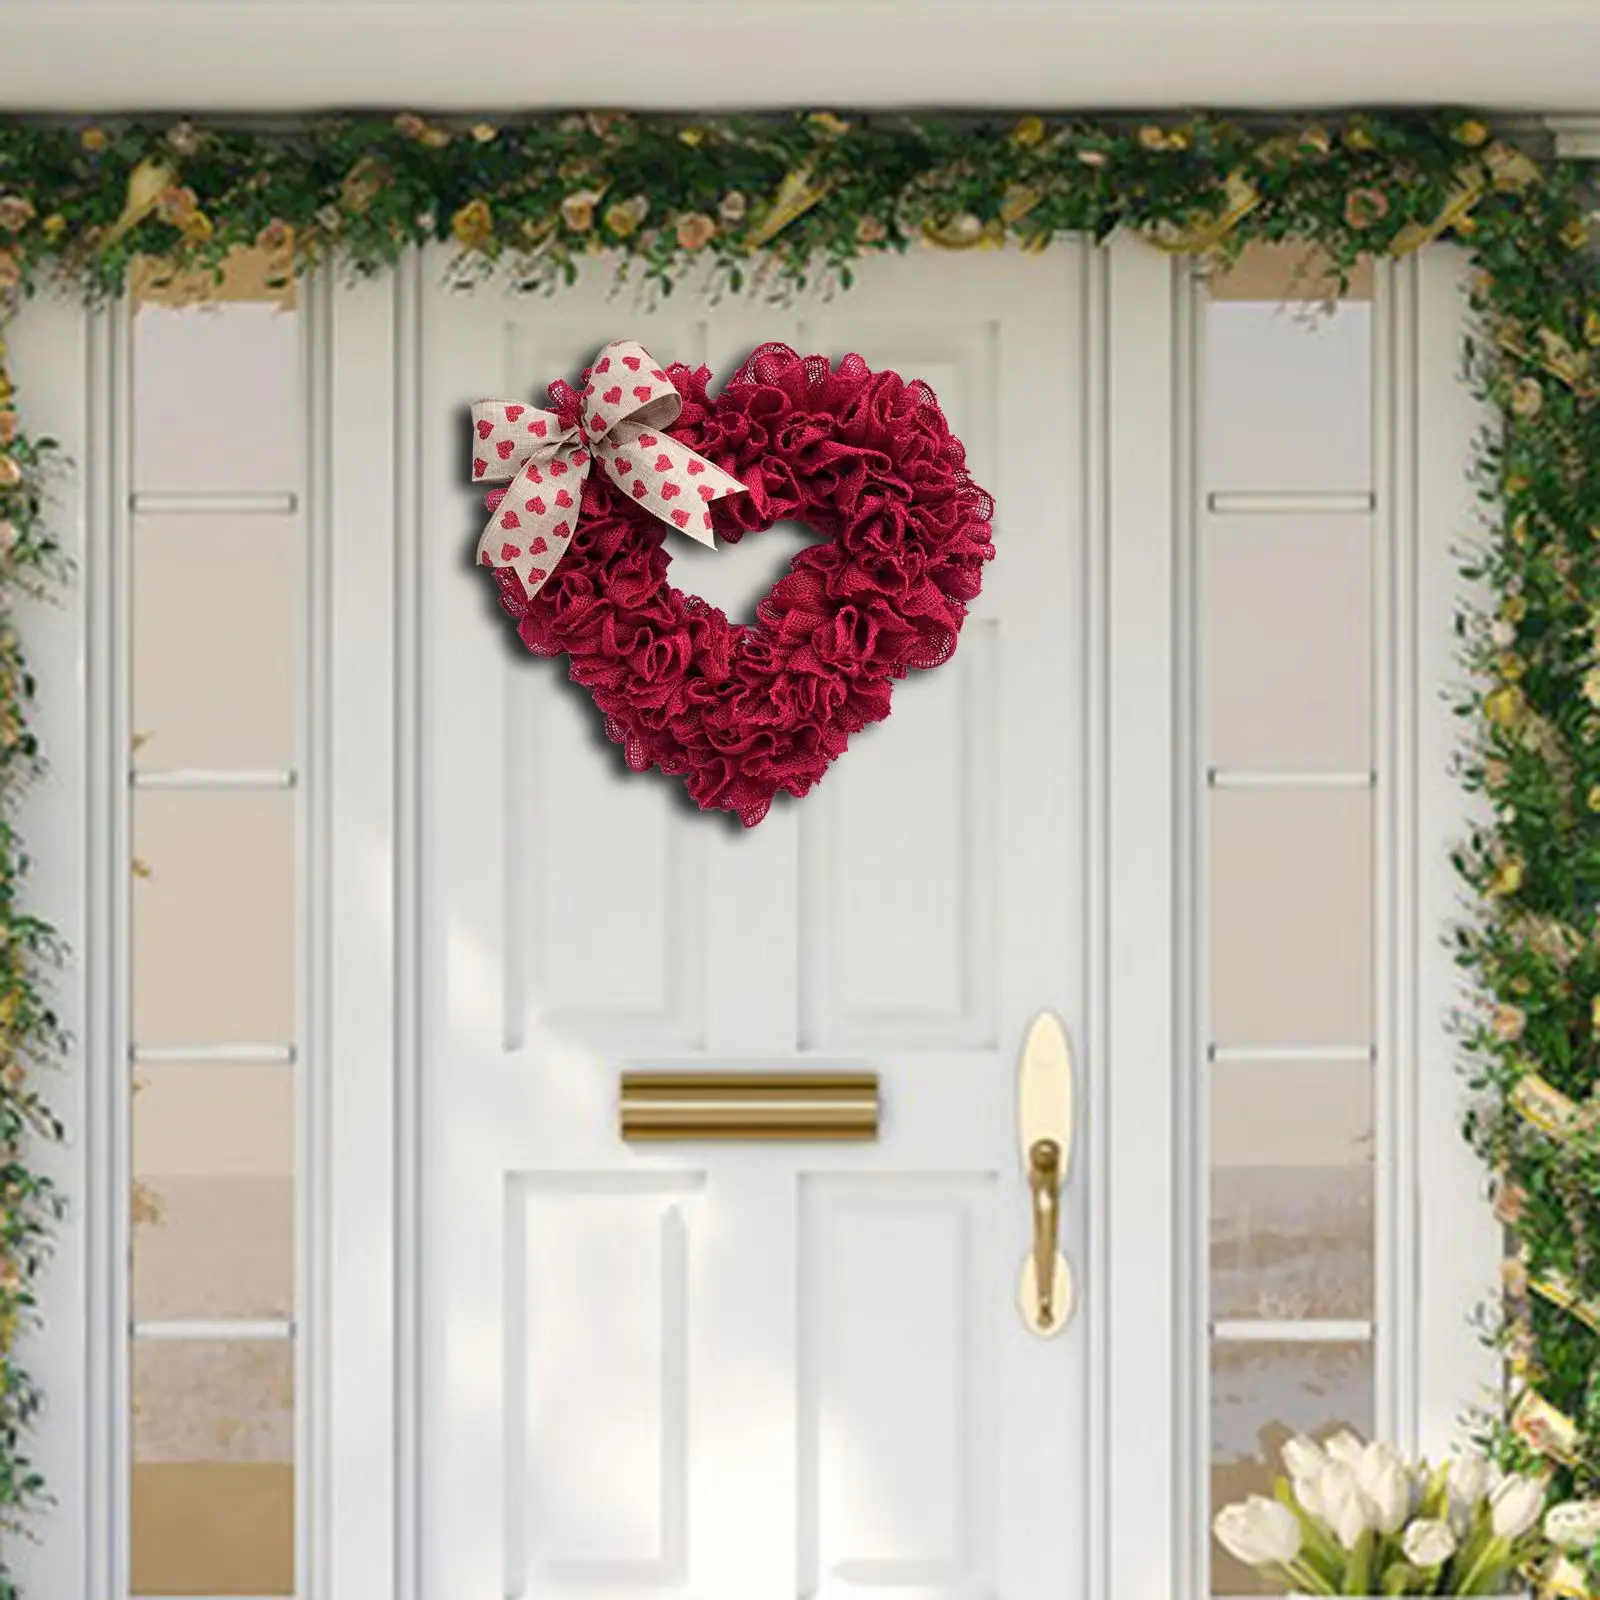 15.75inch Valentines Wreath Hanging Door Wreath Decorative Heart Love Sign Reusable Ornament for Mantel Porch Easter Home Decor